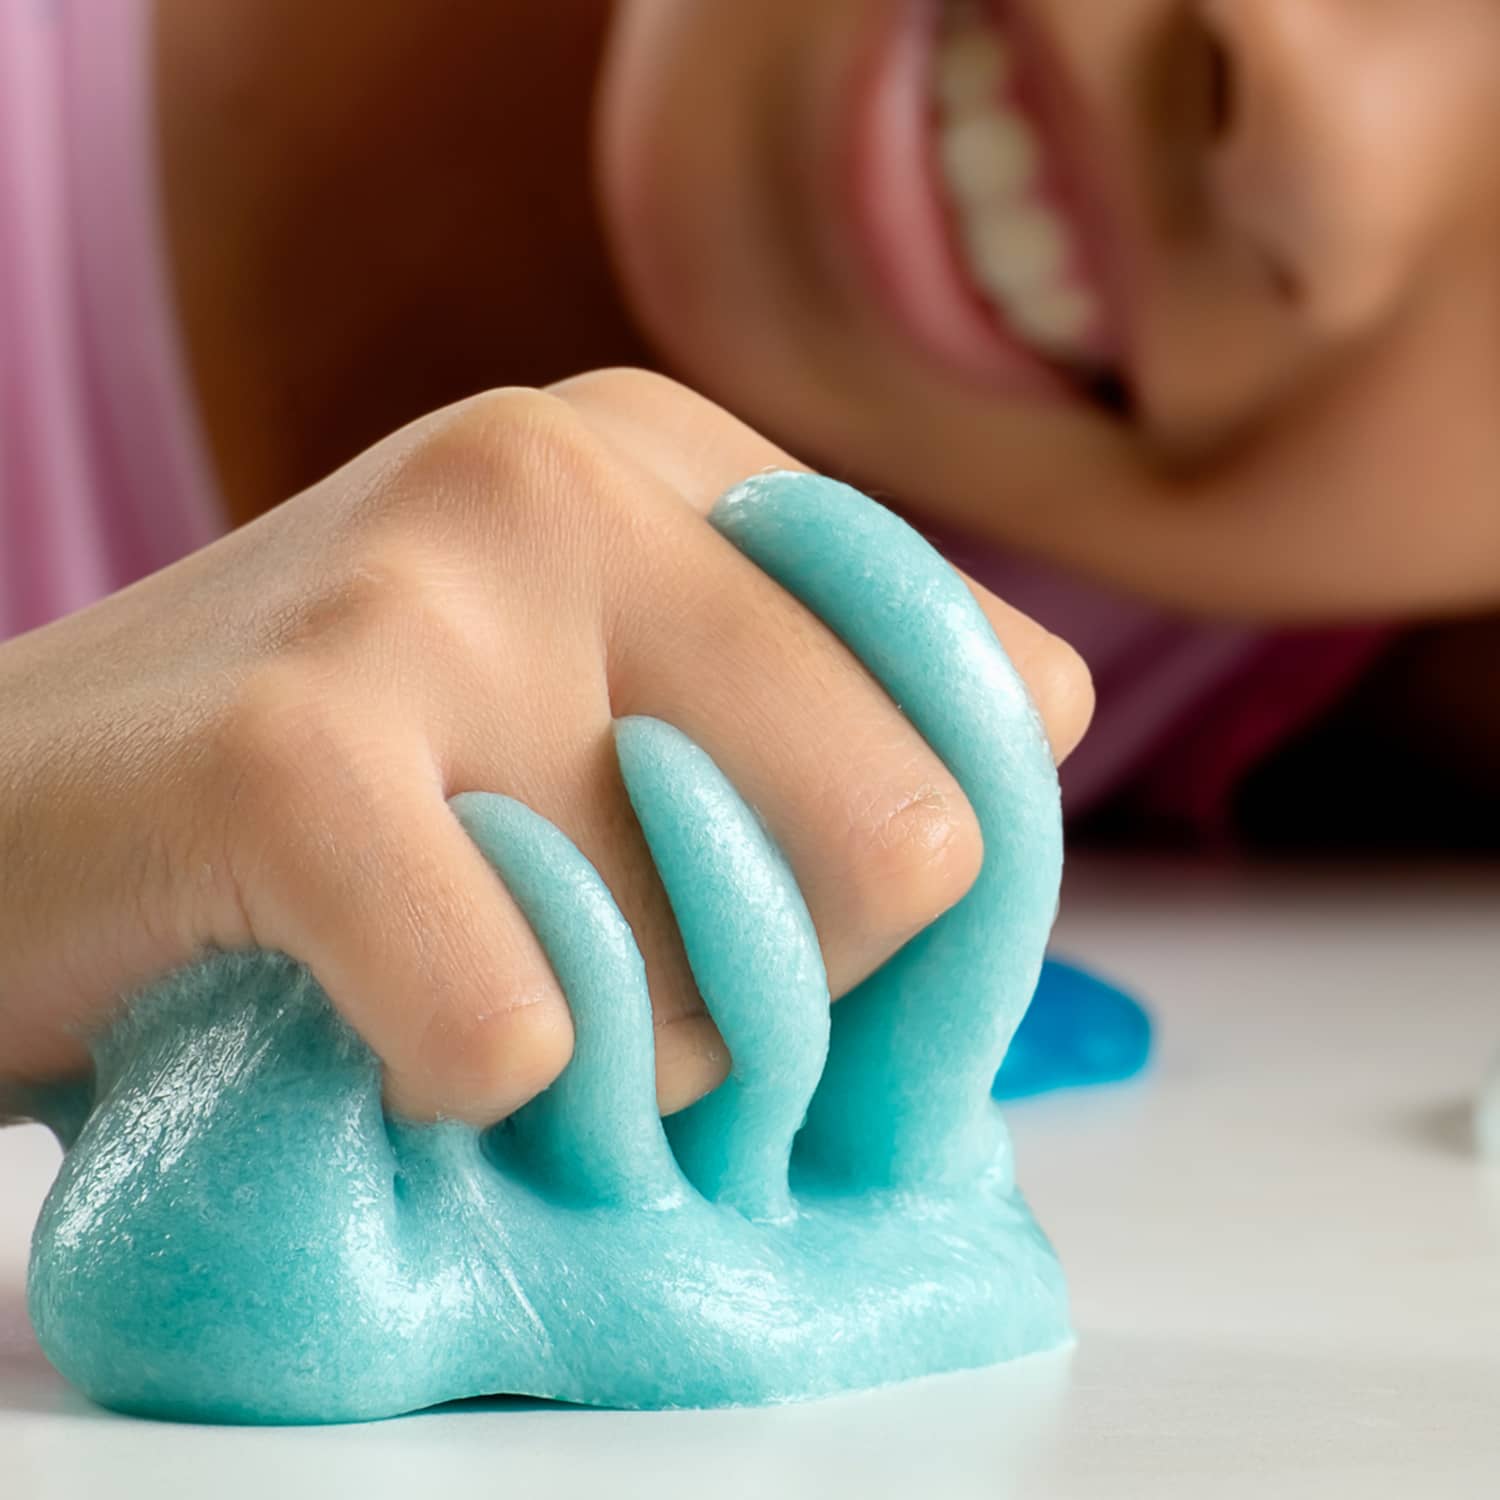 How To Make Your Own Cleaning Slime